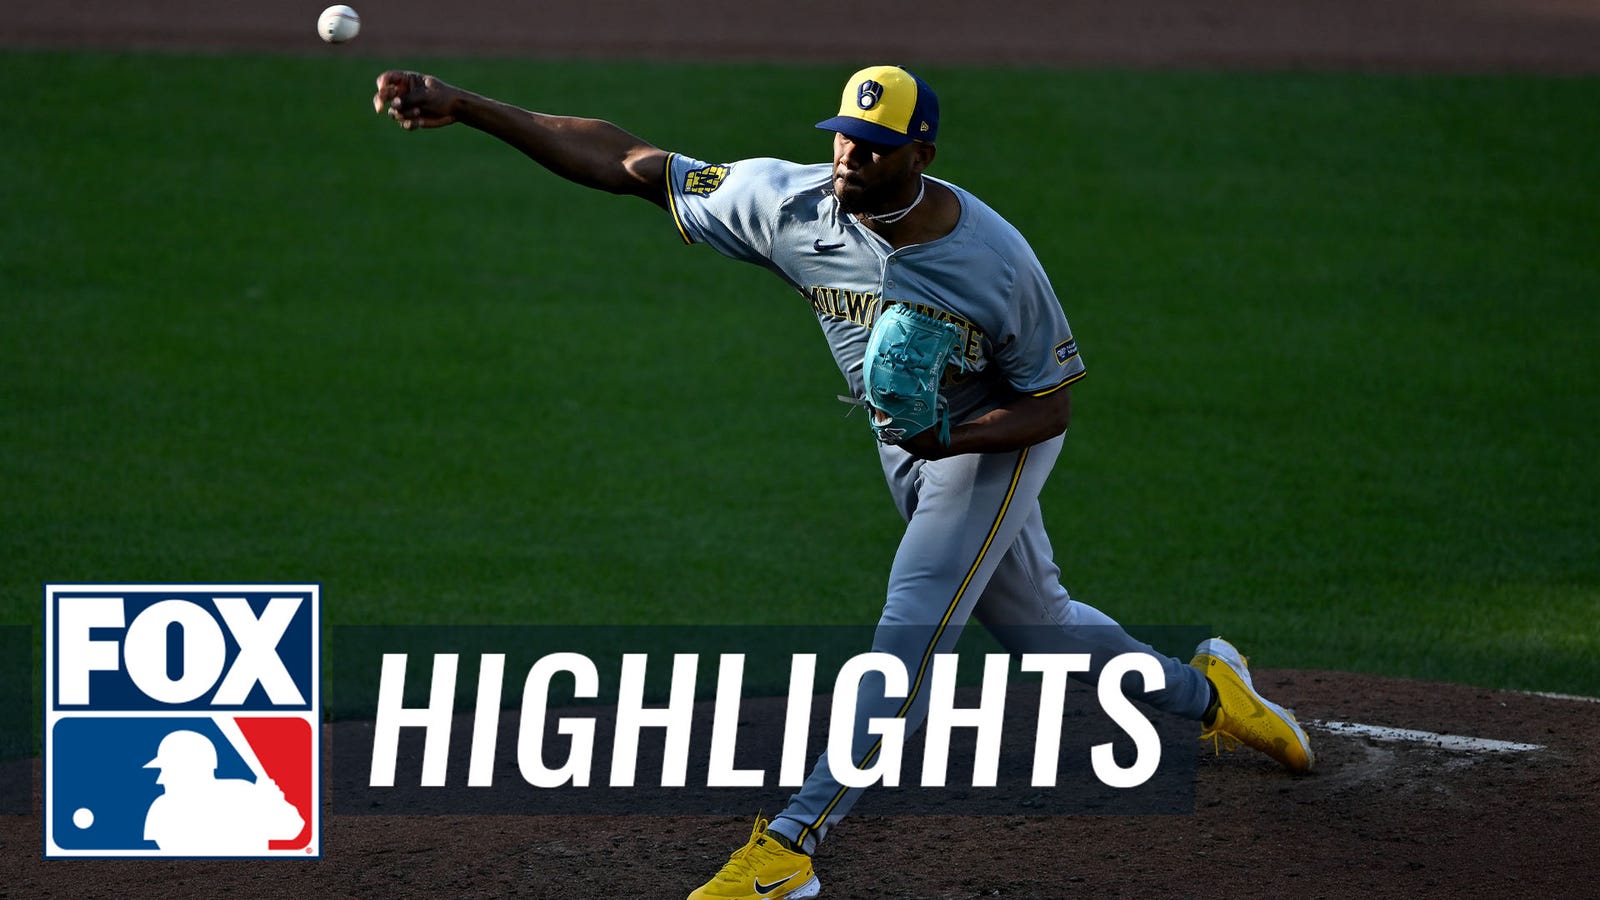 Highlights from the Brewers' 11-5 win over the Orioles